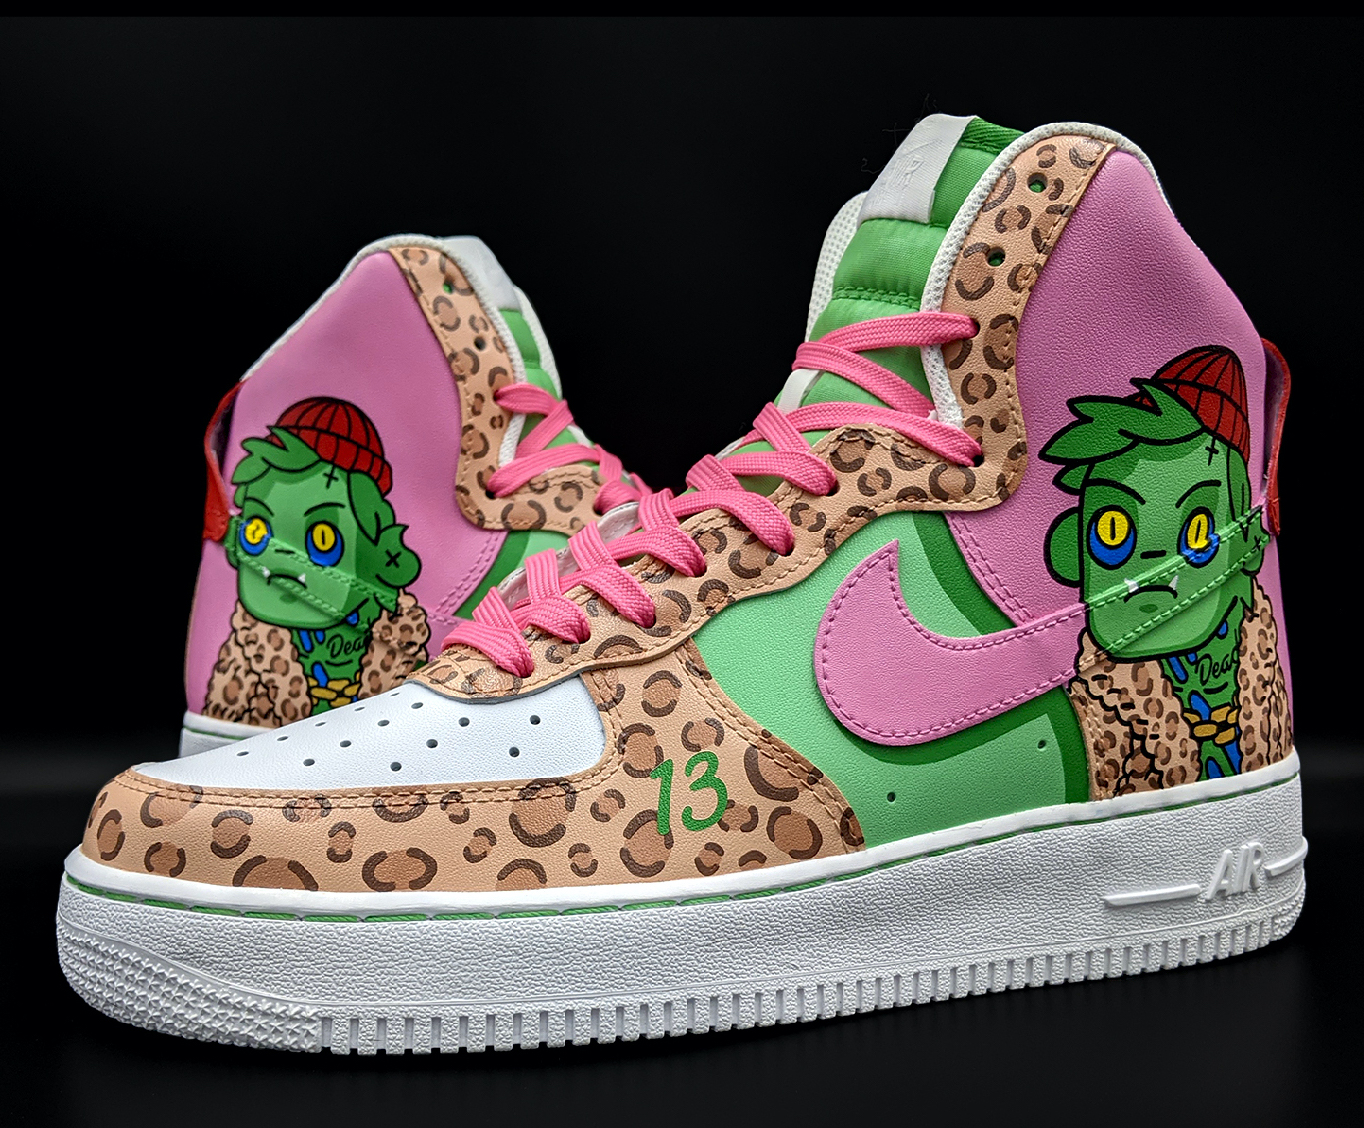 Deadfellaz owners have the chance to win a customized pair of Air Forces Ones with their NFT featured on them. The raffle will be powered by Chainlink VRF.